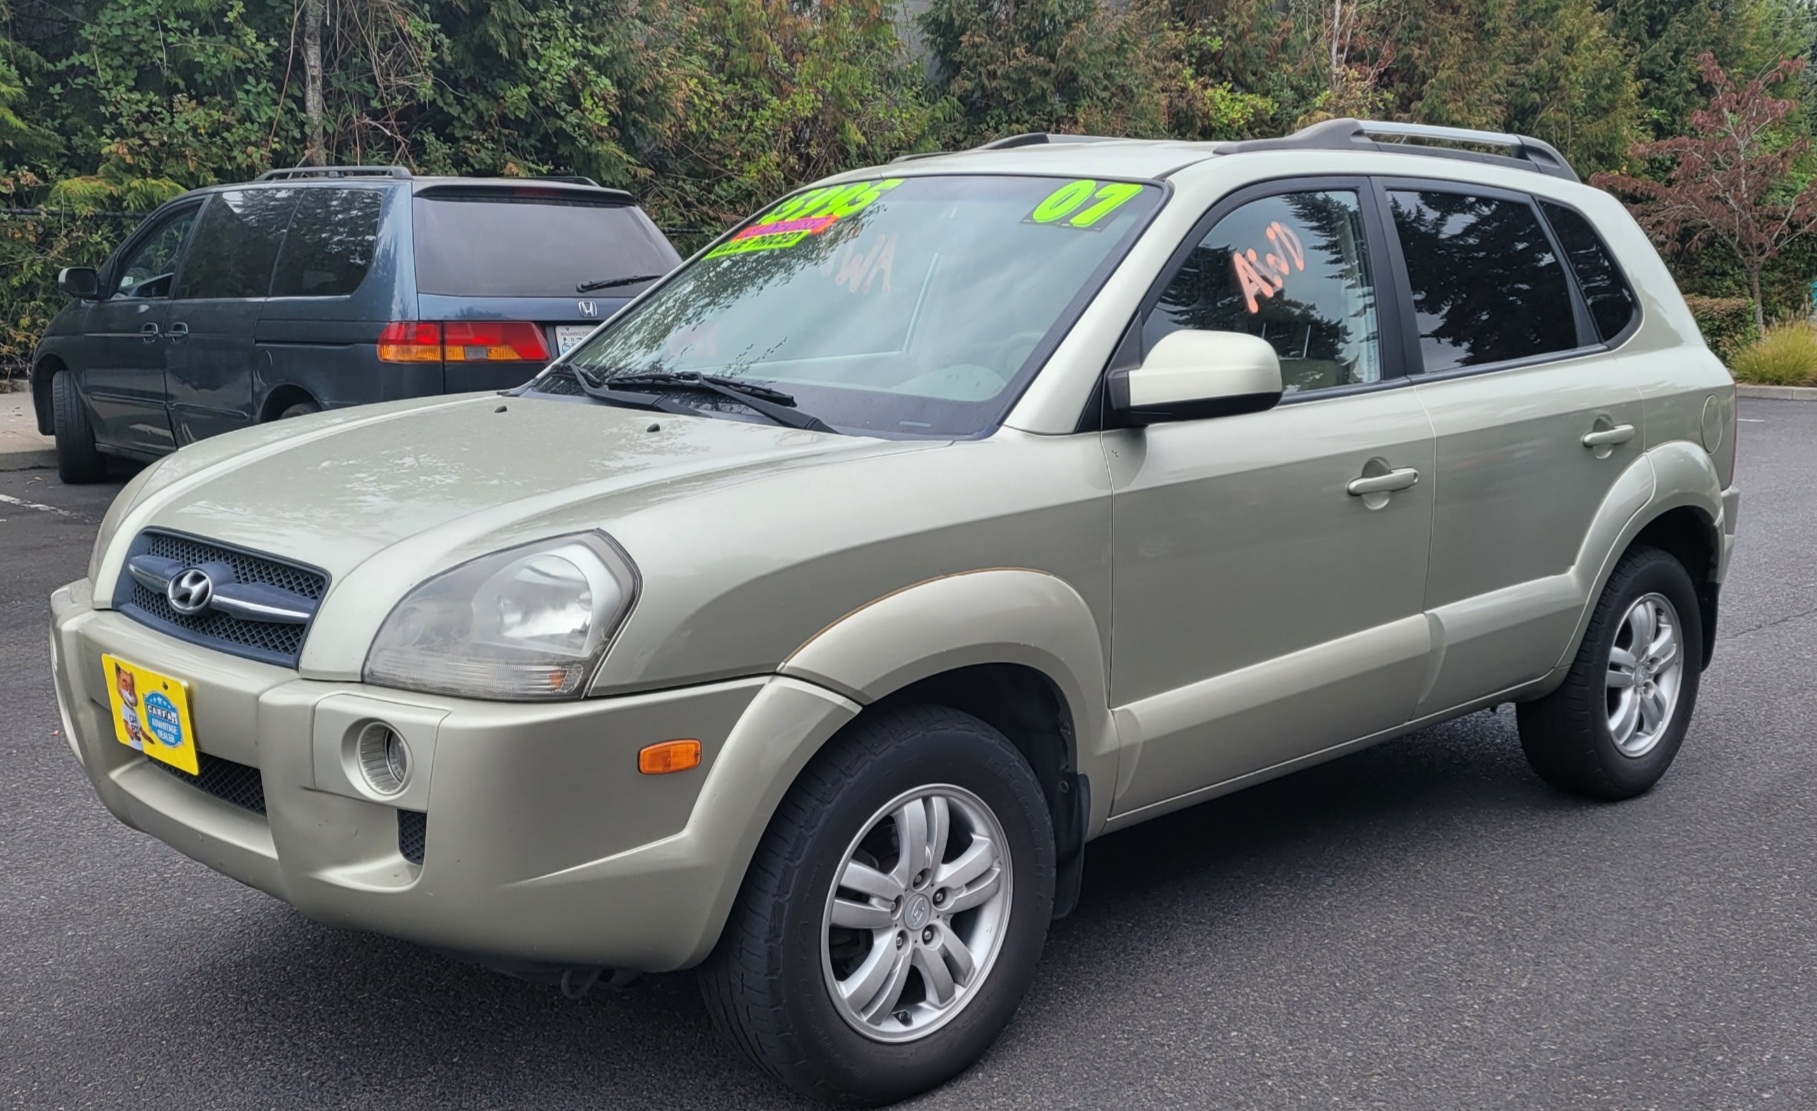 2007 HYUNDAI TUCSON LIMITED 4WD~ FULLY LOADED AND VALUE PRICED! - Top Auto  Brokers